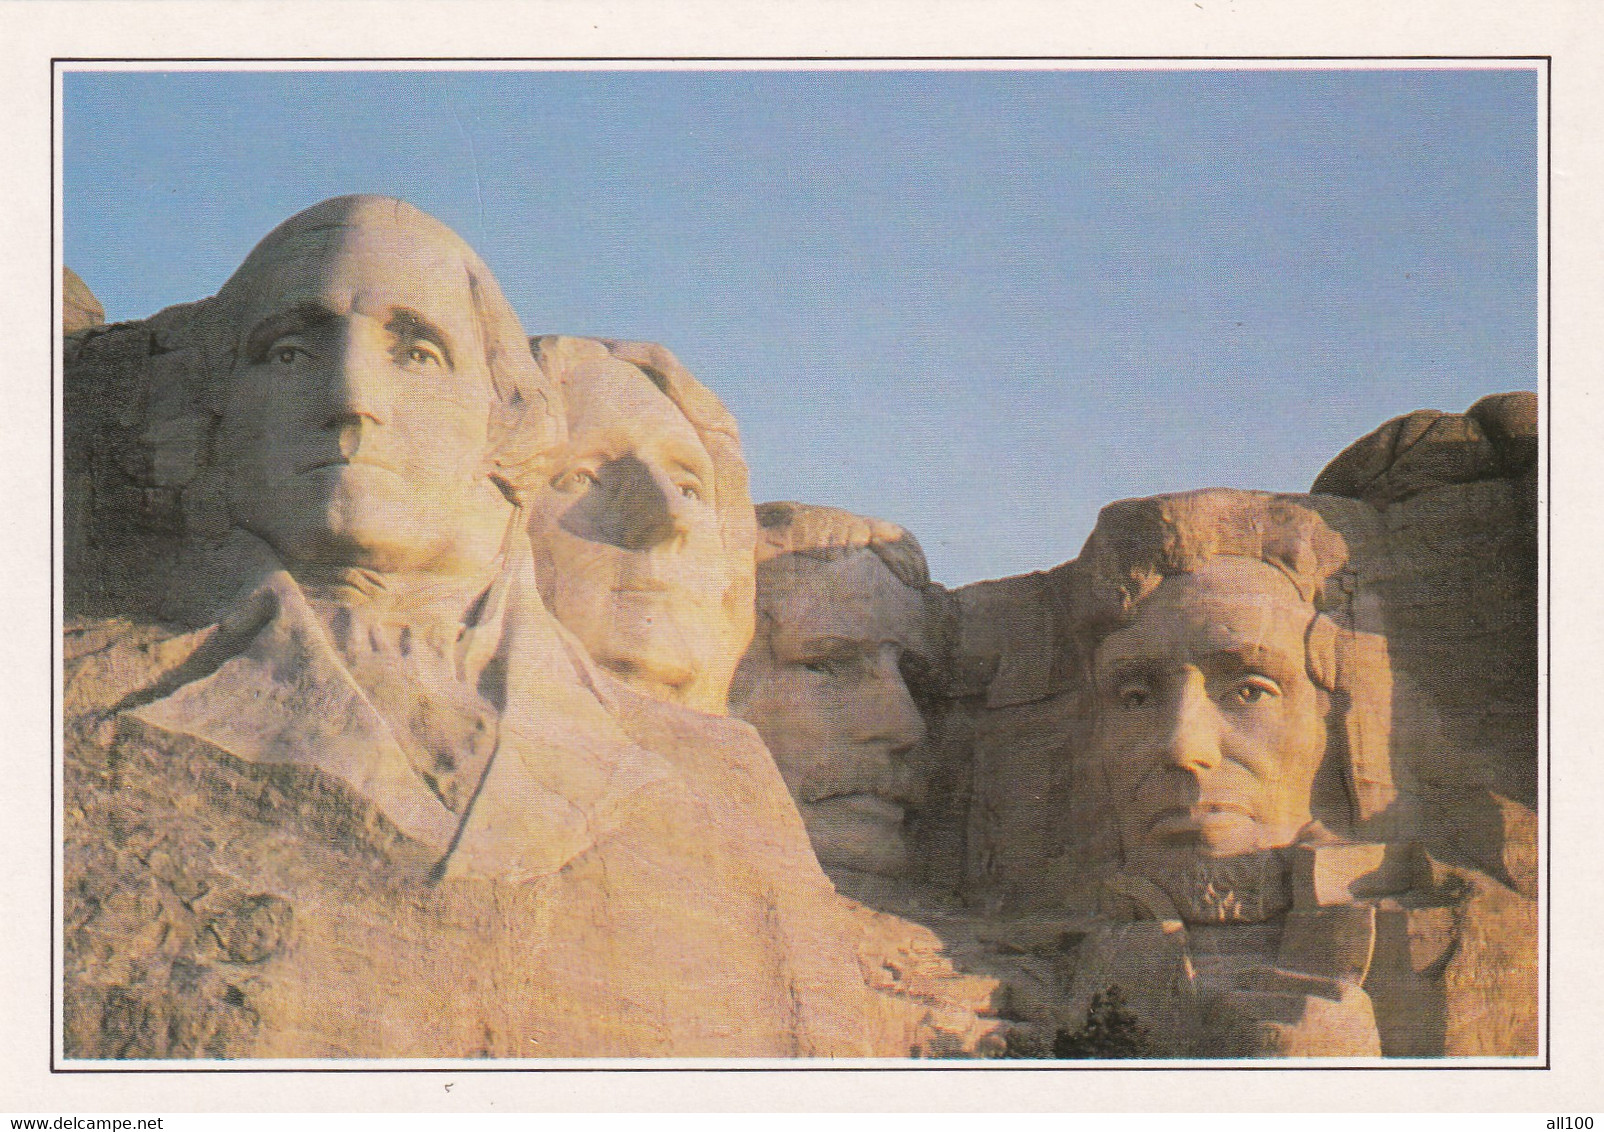 A20335 - MOUNT RUSHMORE HEADS OF FOUR PRESIDENTS LES TETES DE QUATRE PRESIDENTS USA UNITED STATES OF AMERICA - Mount Rushmore